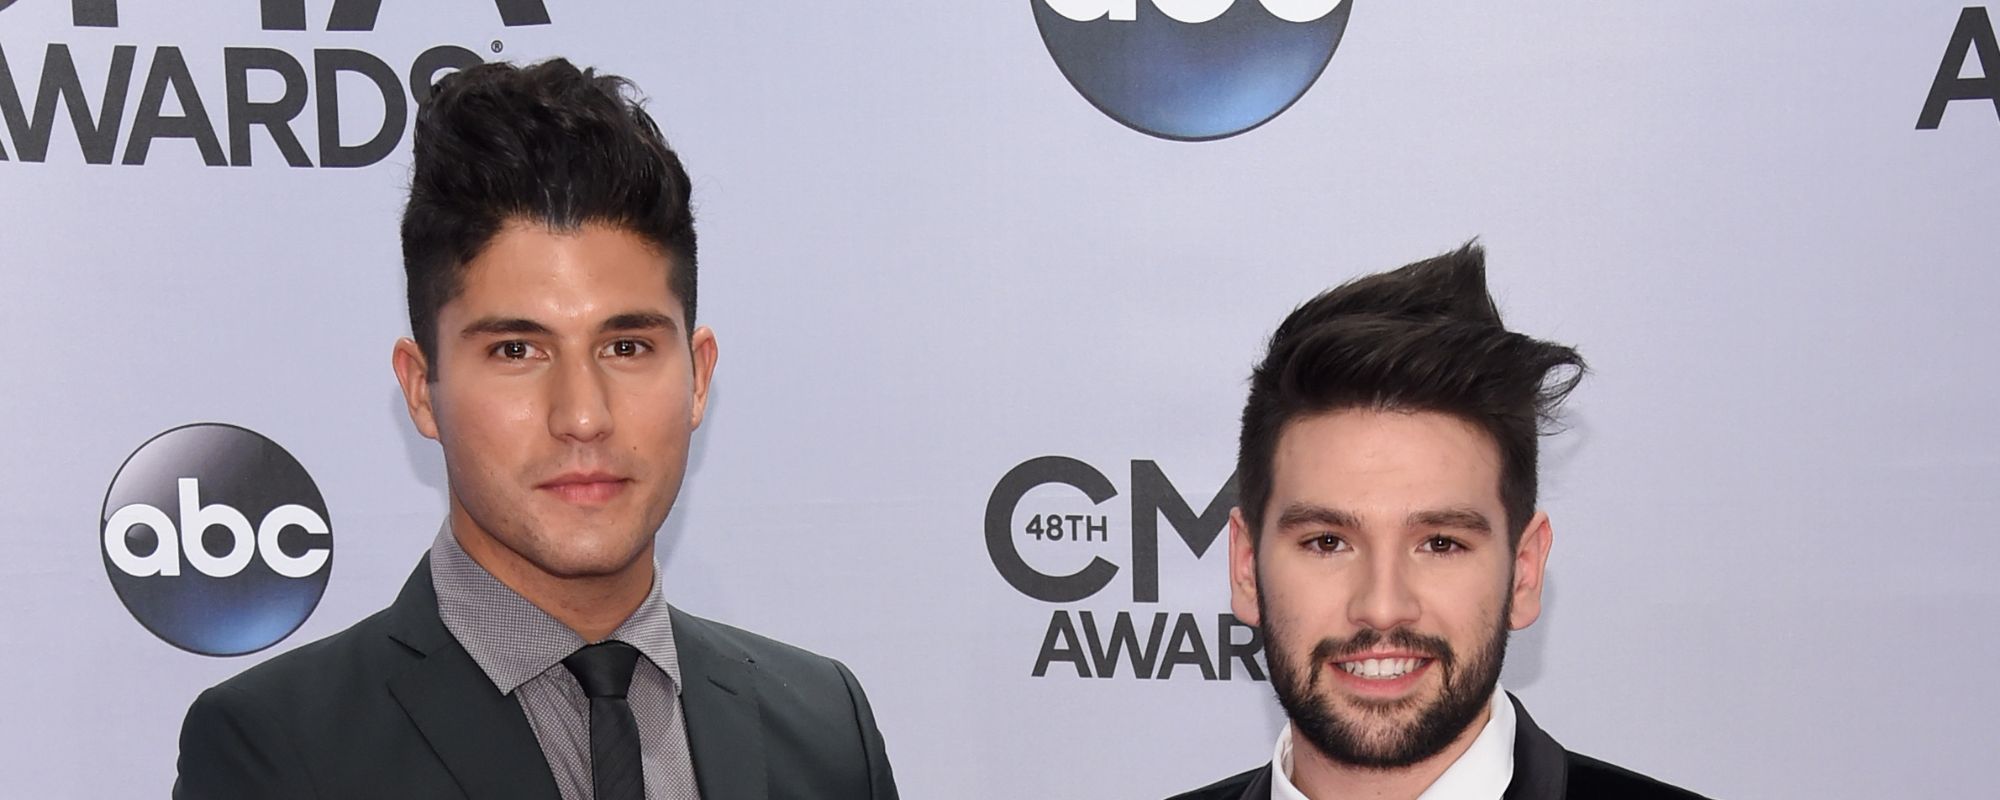 Dan + Shay Tease Fans With Cryptic Post About Upcoming Announcement